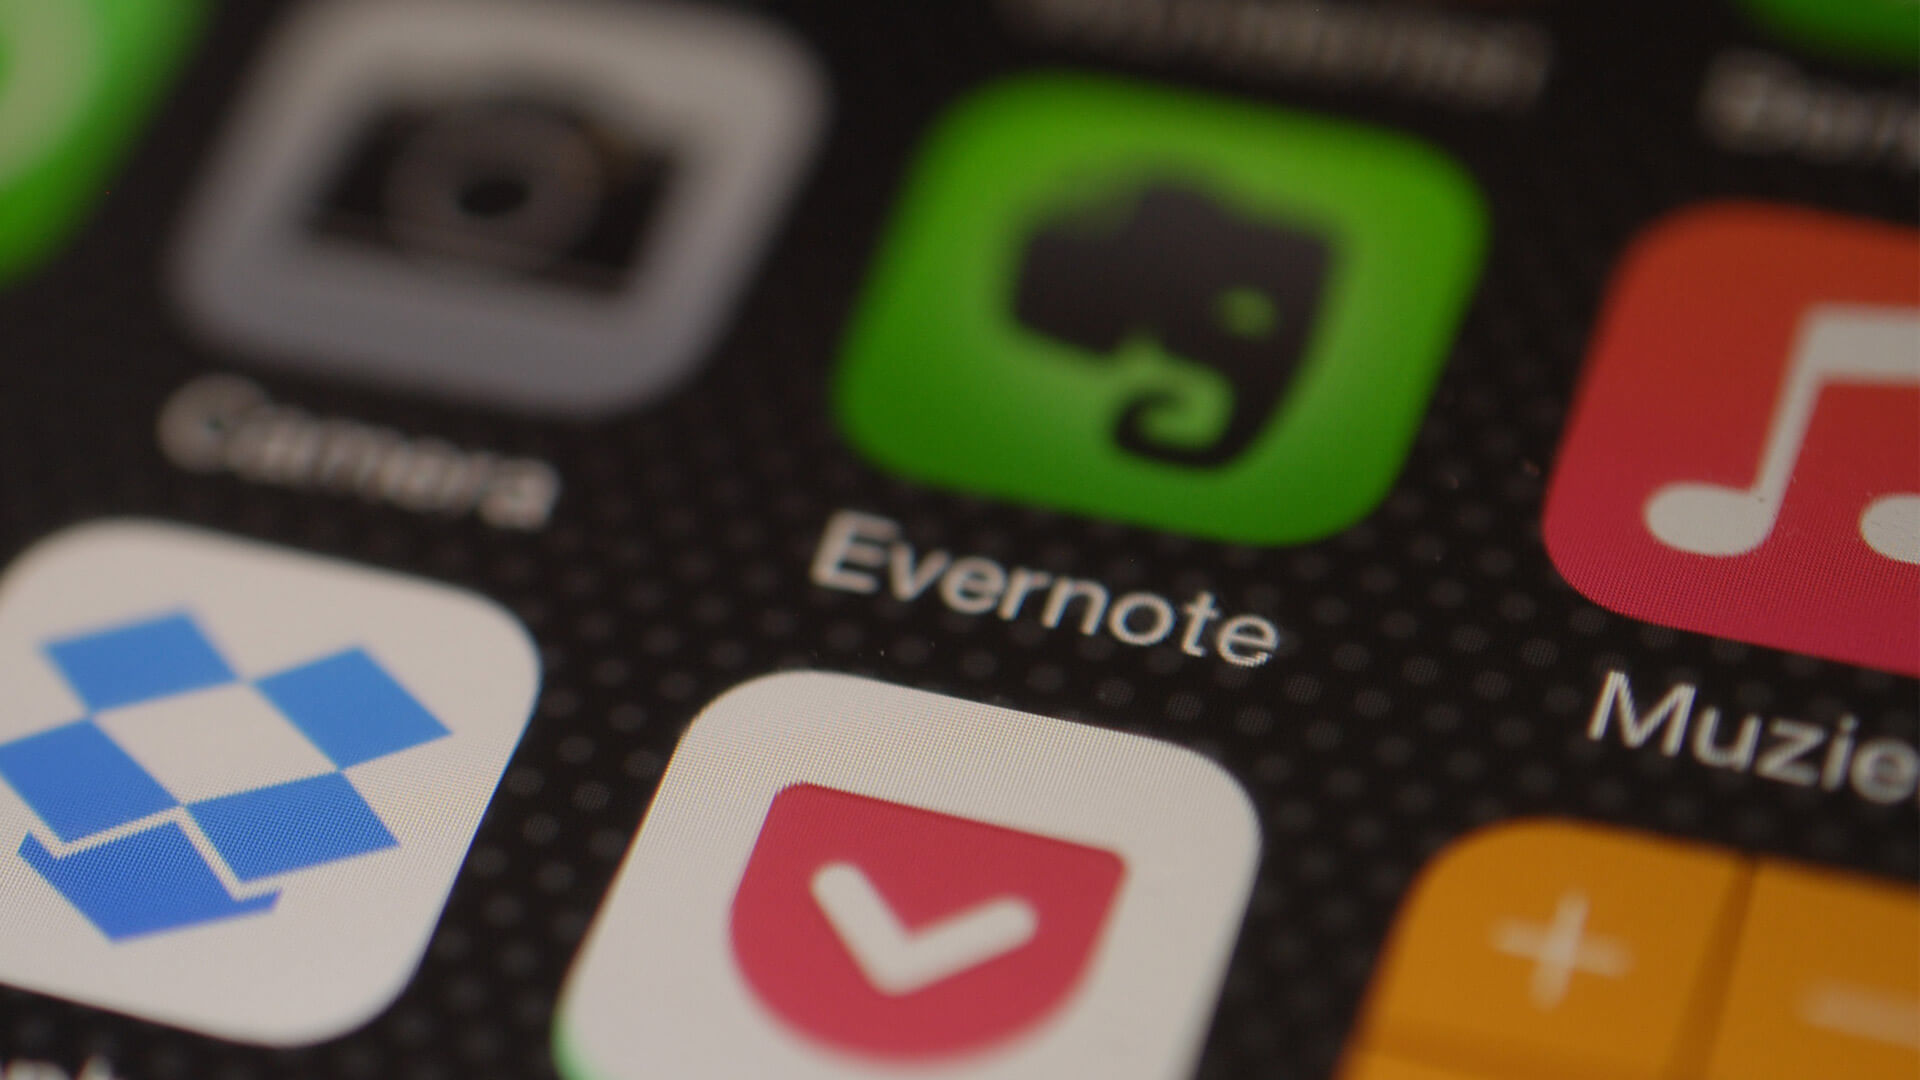 Best evernote alternatives for iphone and ipad